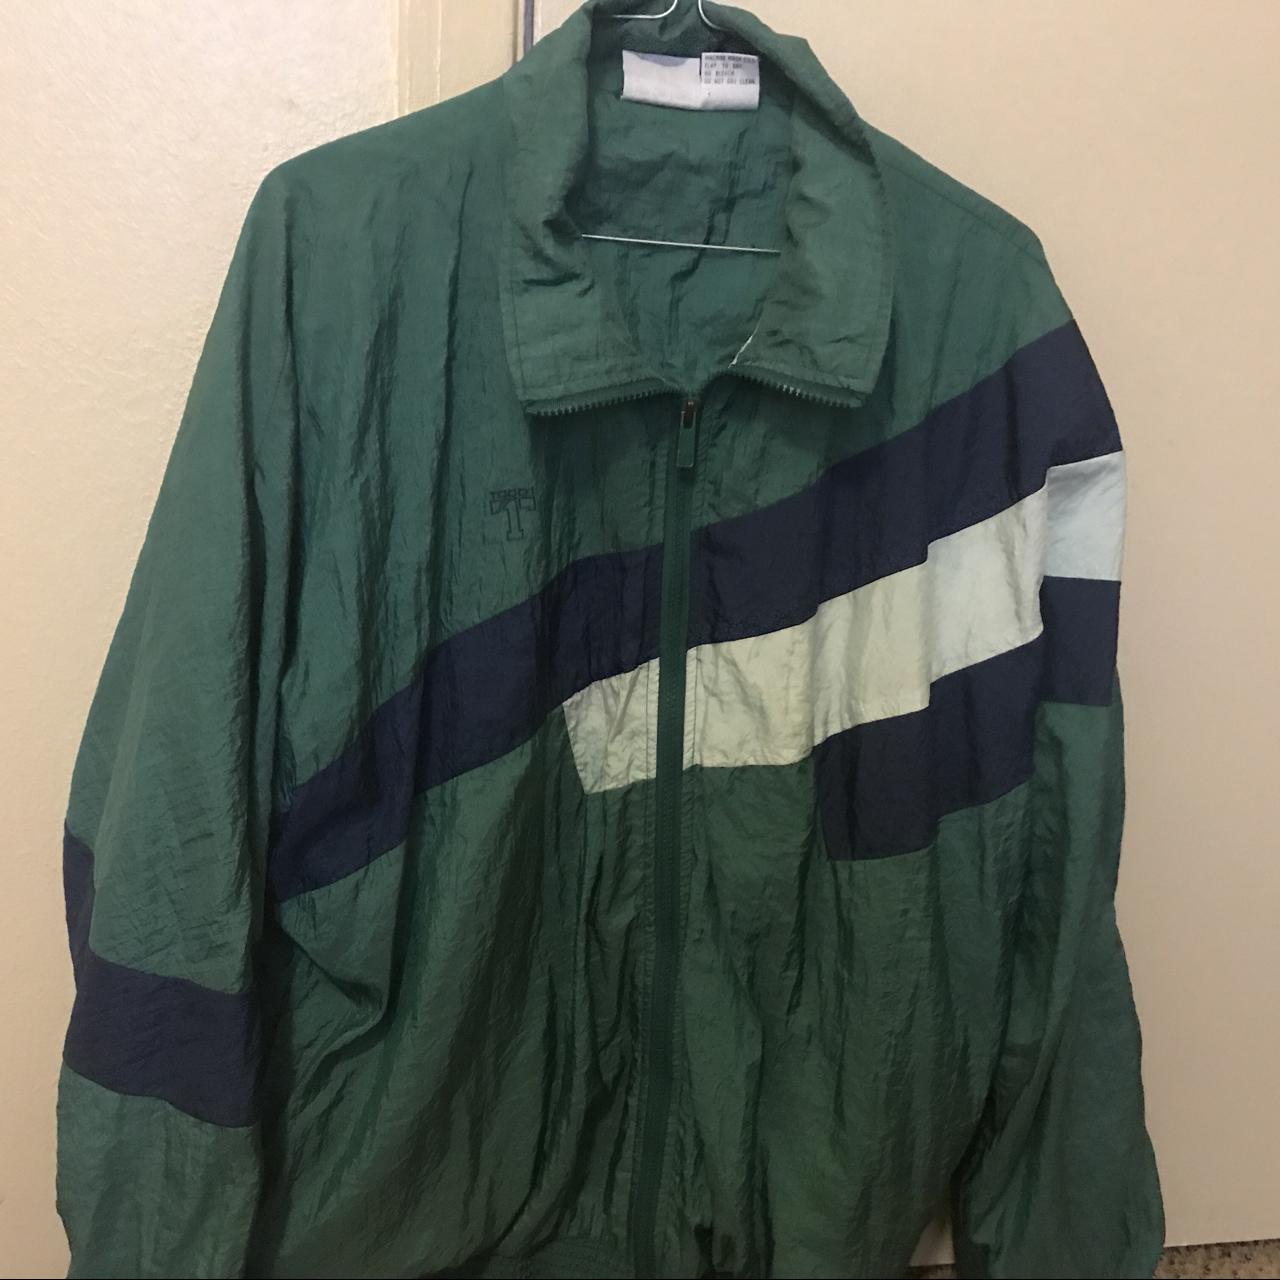 Product Image 1 - Vintage windbreaker by todd1 ,